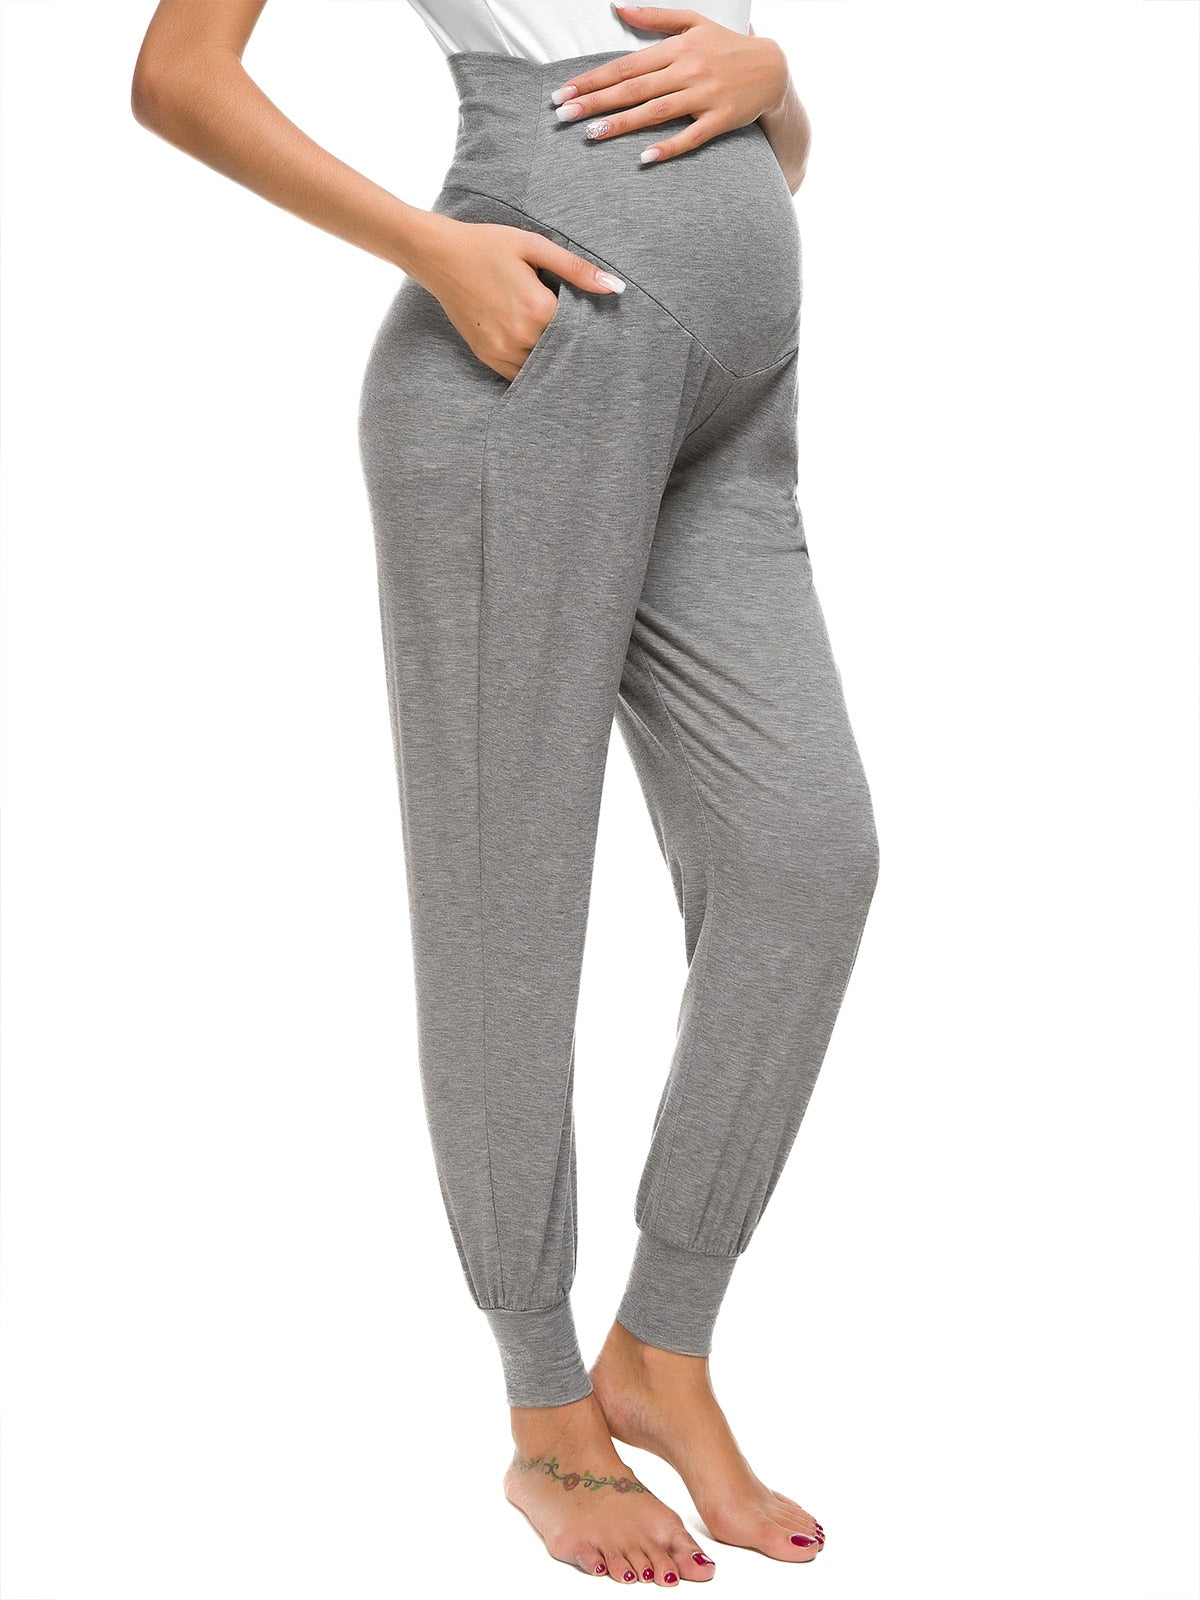 Casual Pregnancy Stretchy Comfortable Lounge High Waist Trousers with Pocket